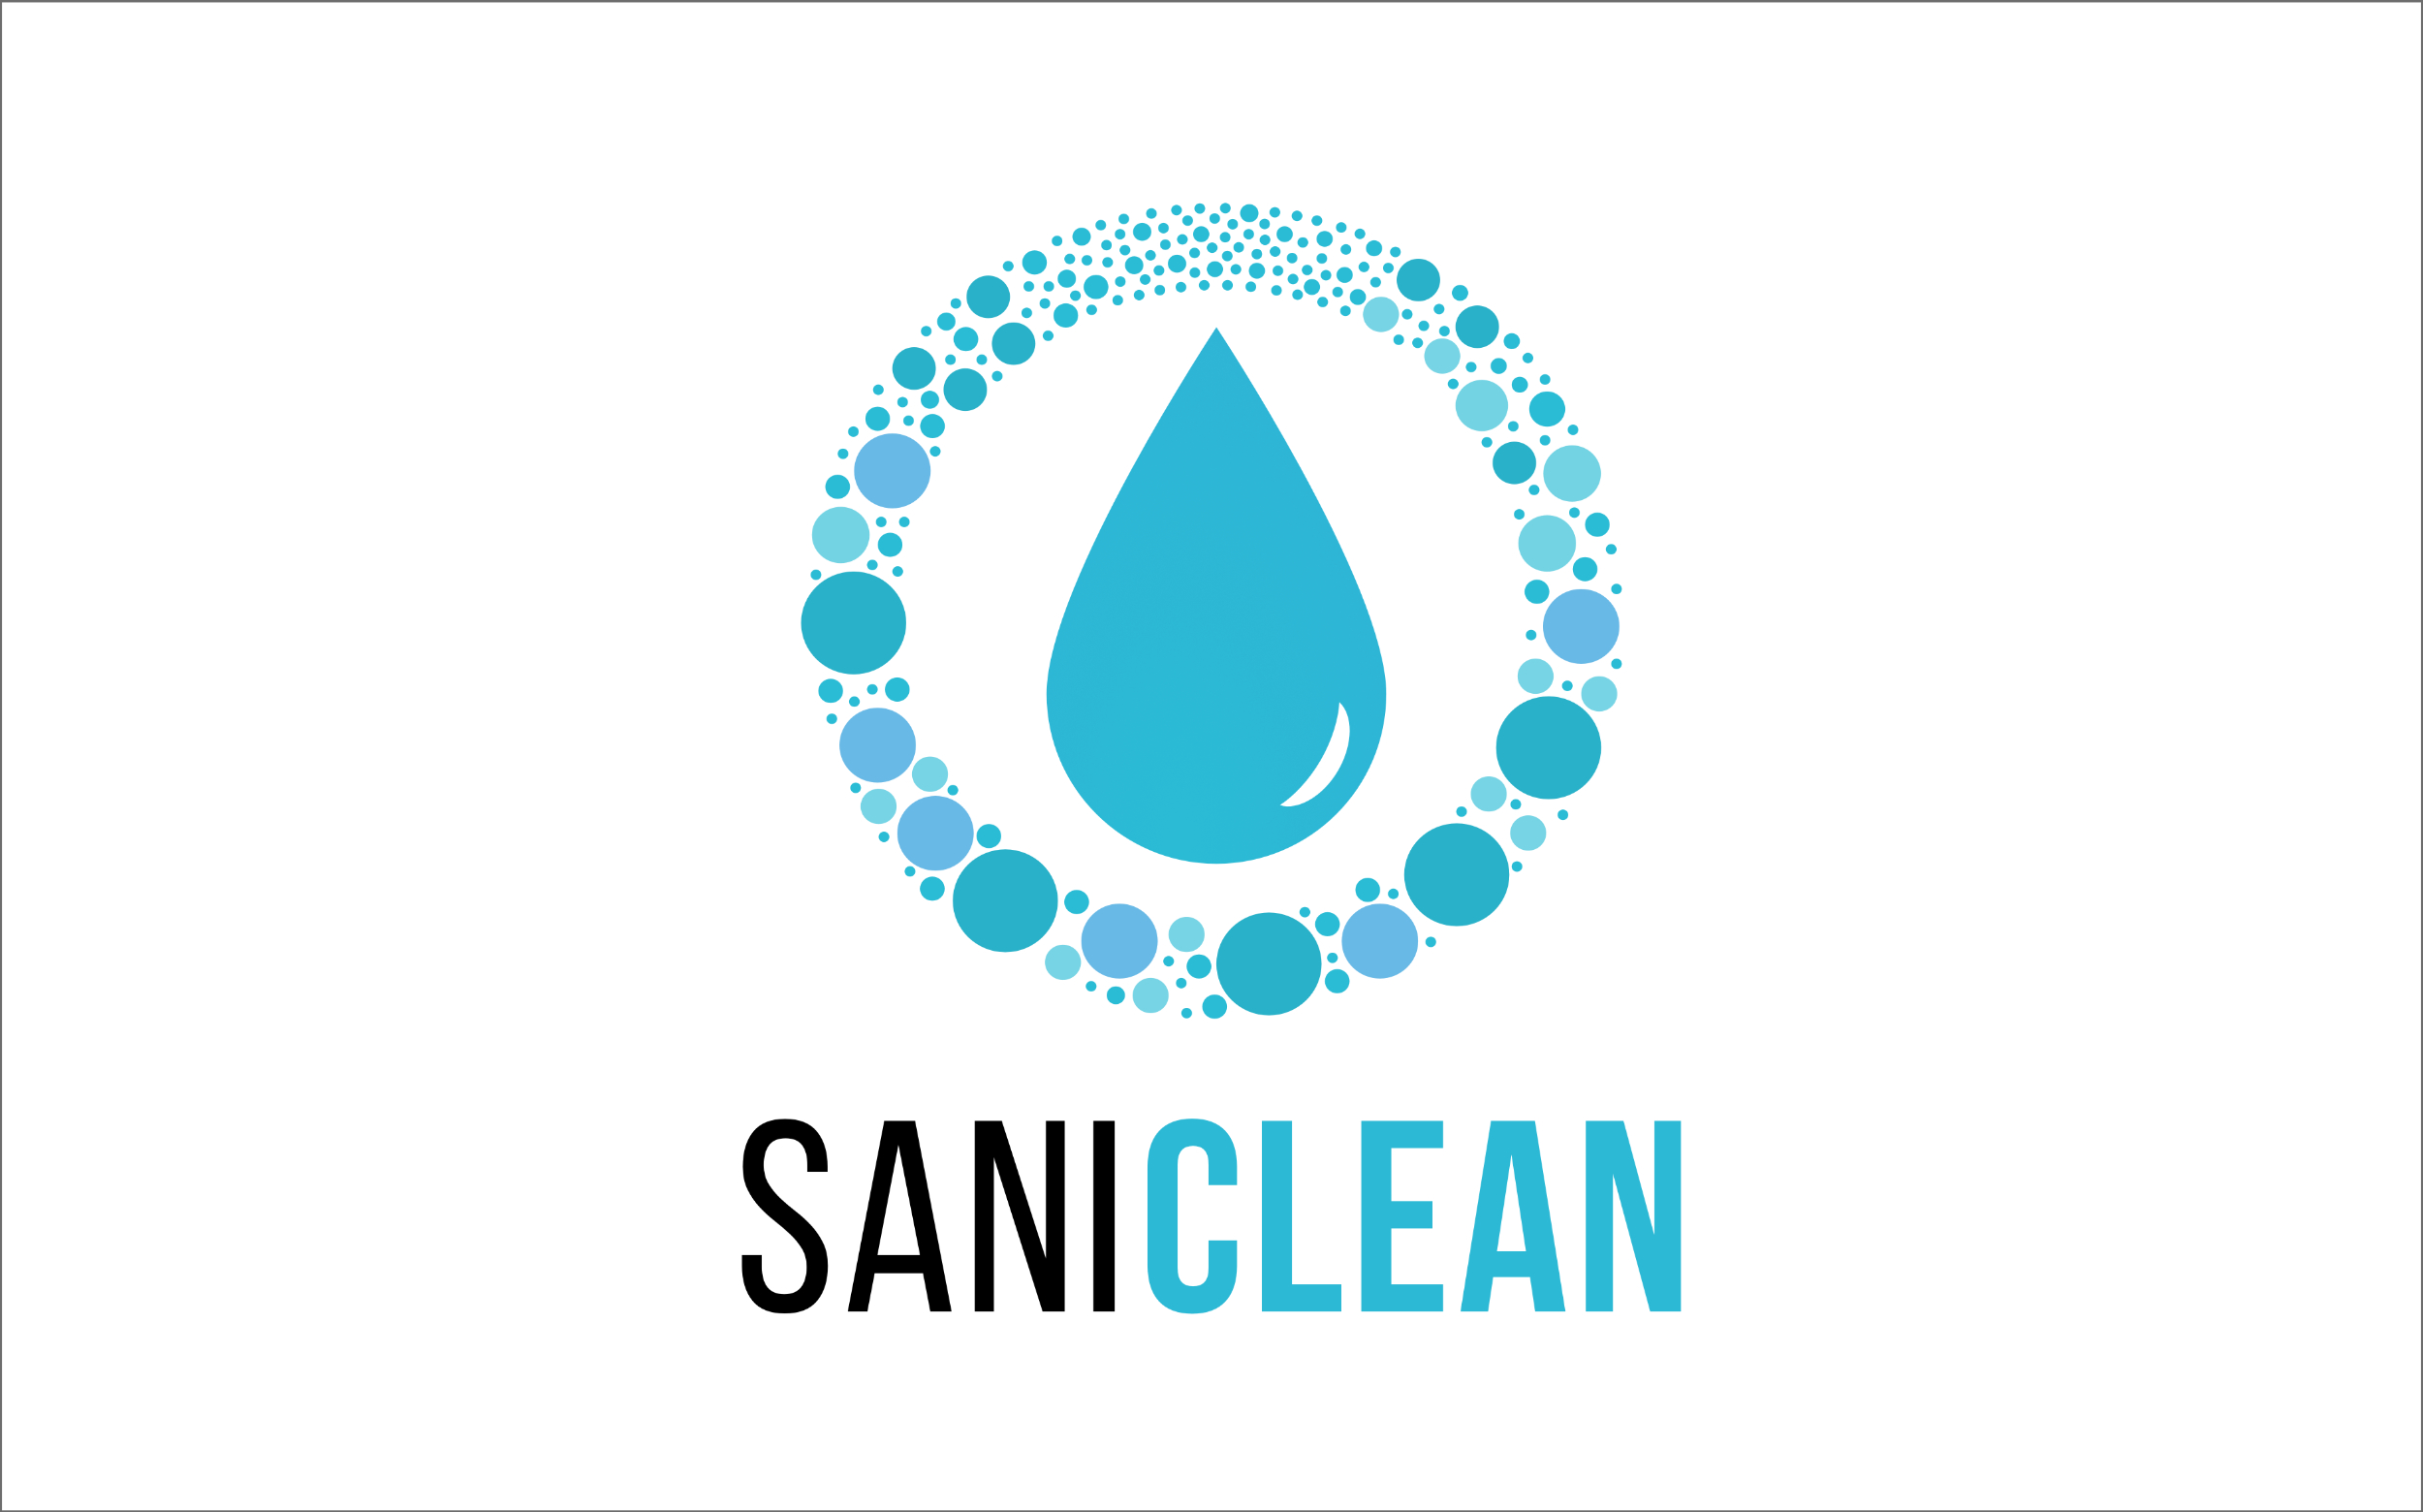 Logo Design for SaniClean.  Made by Jon Glanville - Plymouth Graphic Designer.